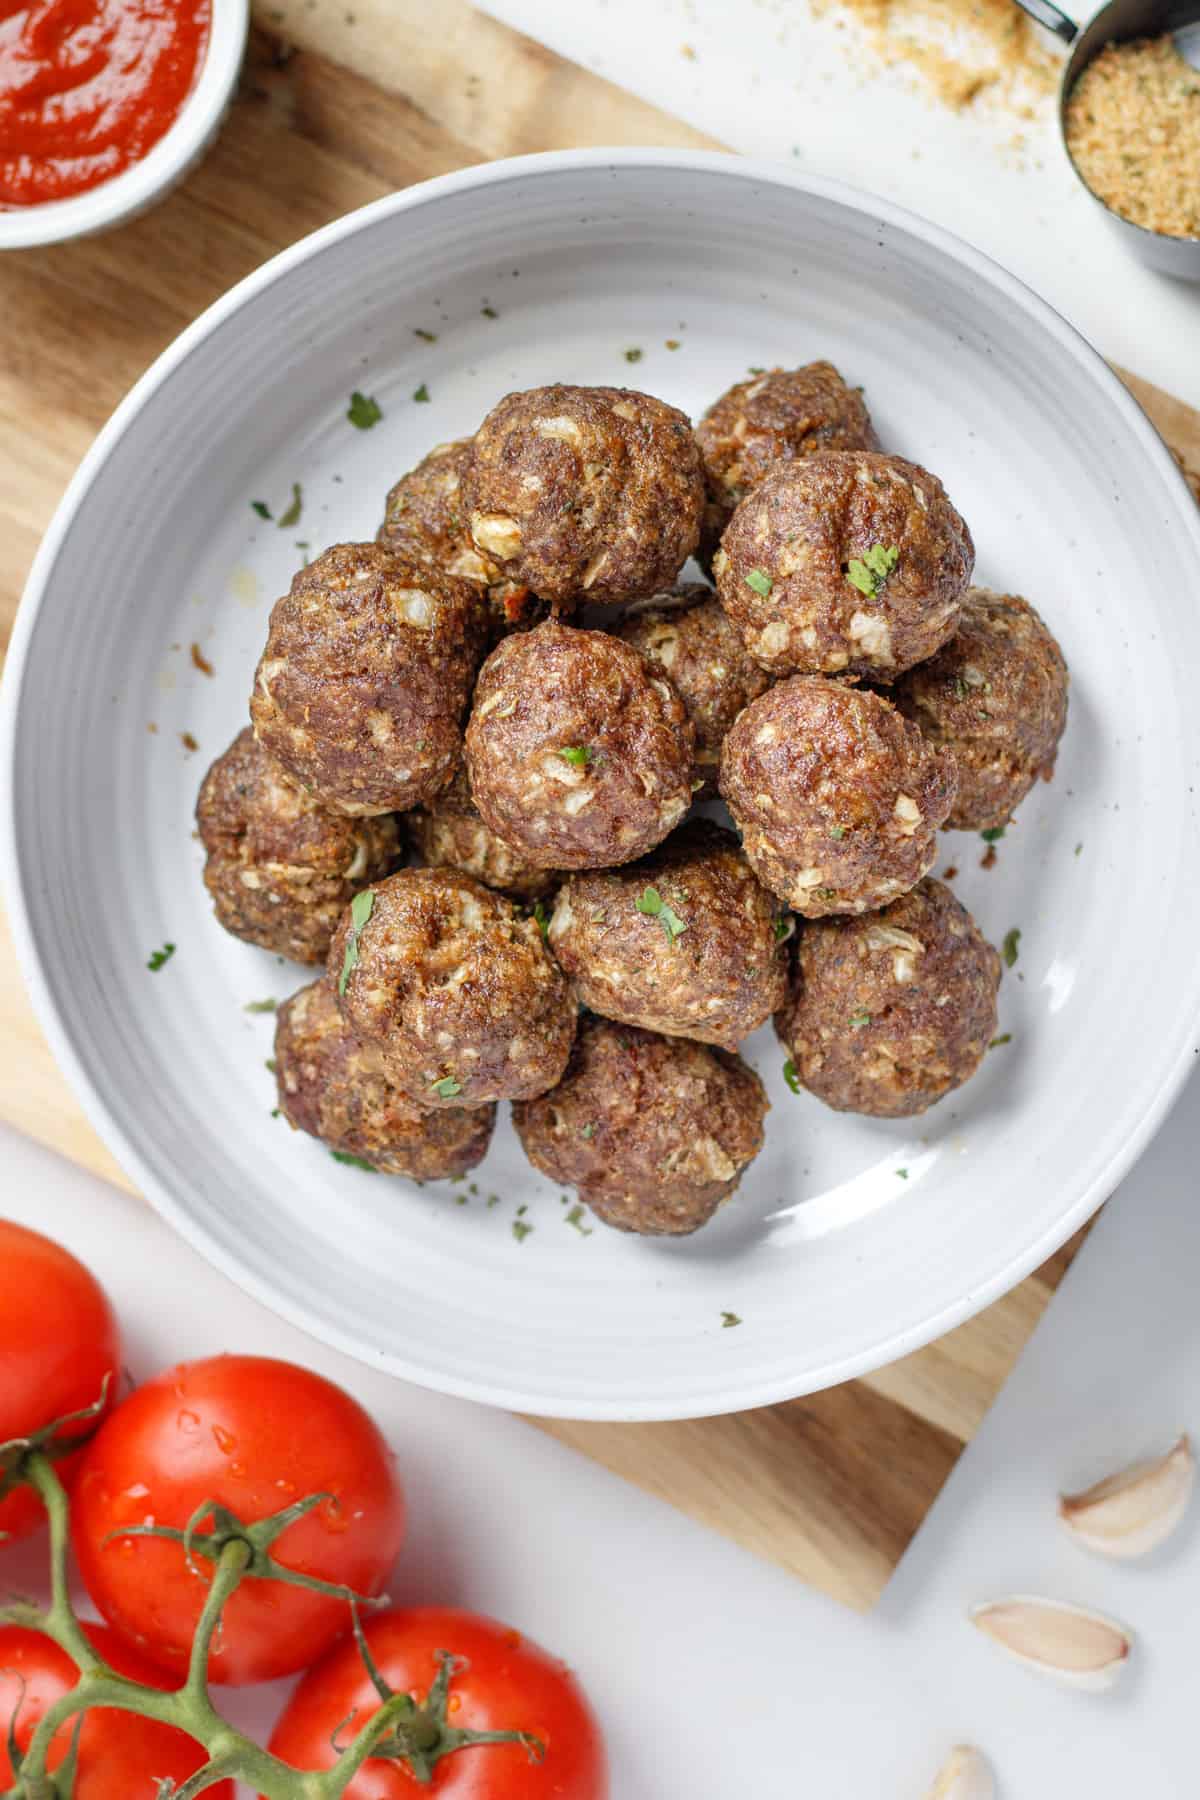 Wagyu meatballs in a white bowl on top of a wooden cutting board. Surrounding the bowl there are red tomatoes on the vine, garlic cloves, marinara sauce and spilled bread crumbs in a black measuring cup.